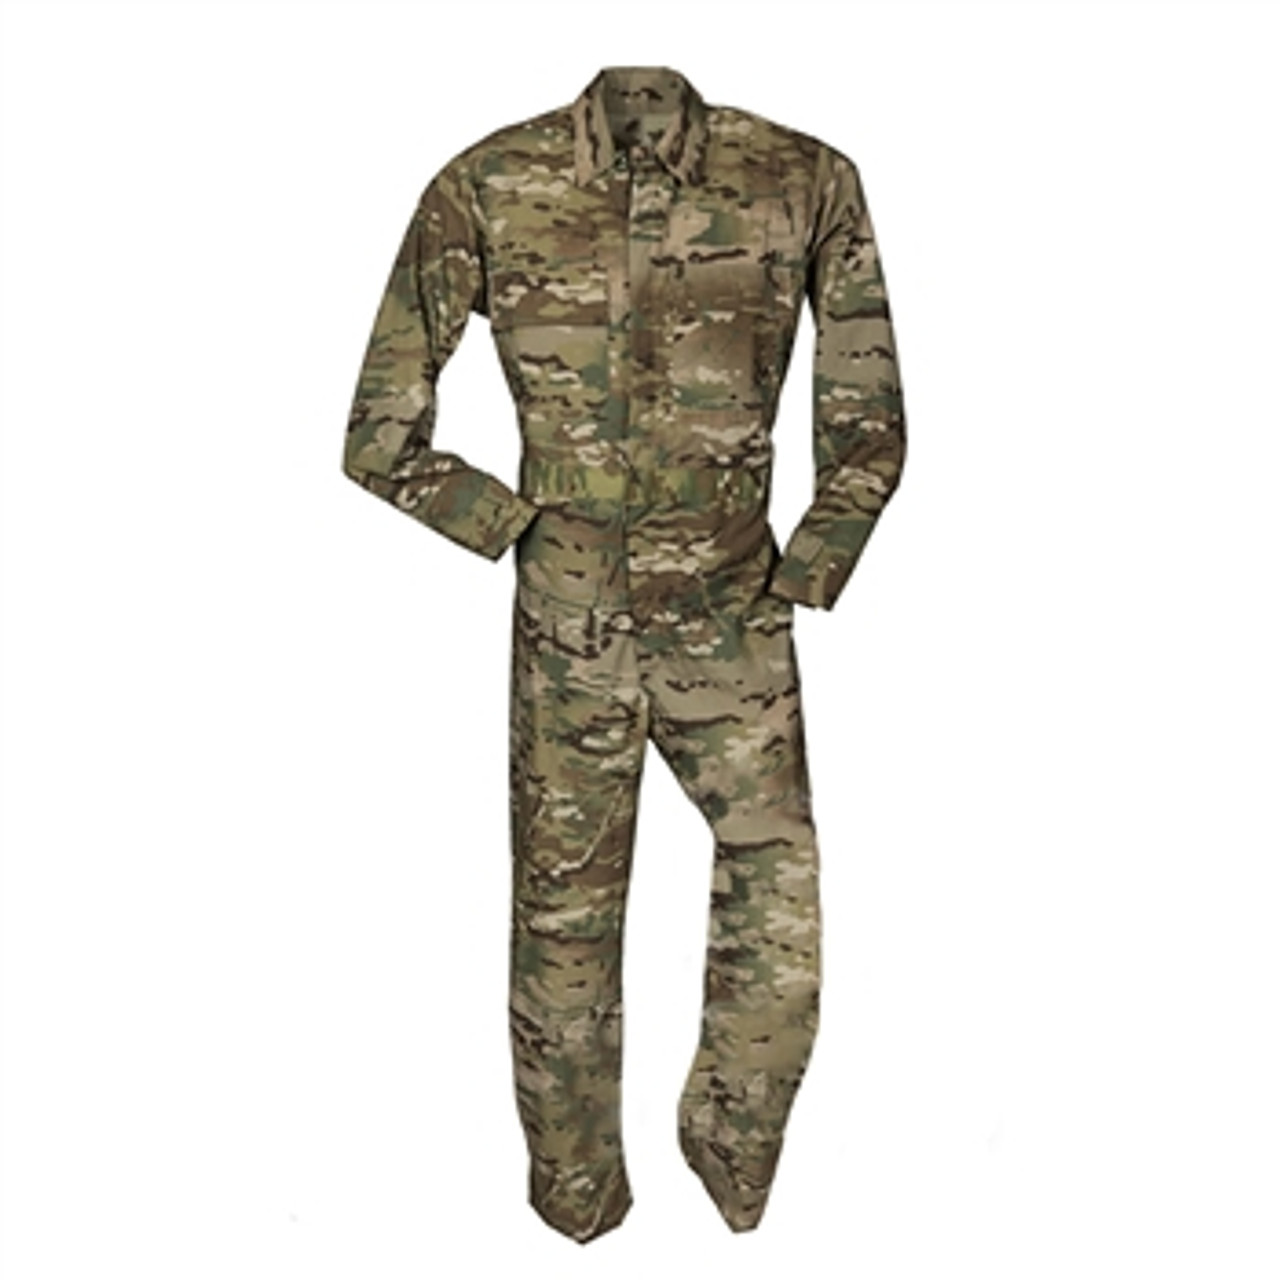 NEW MULTICAM POG-1 PROTECTIVE OUTER GARMENT AND PROTECTIVE UNDER GARMENT  SET PUG